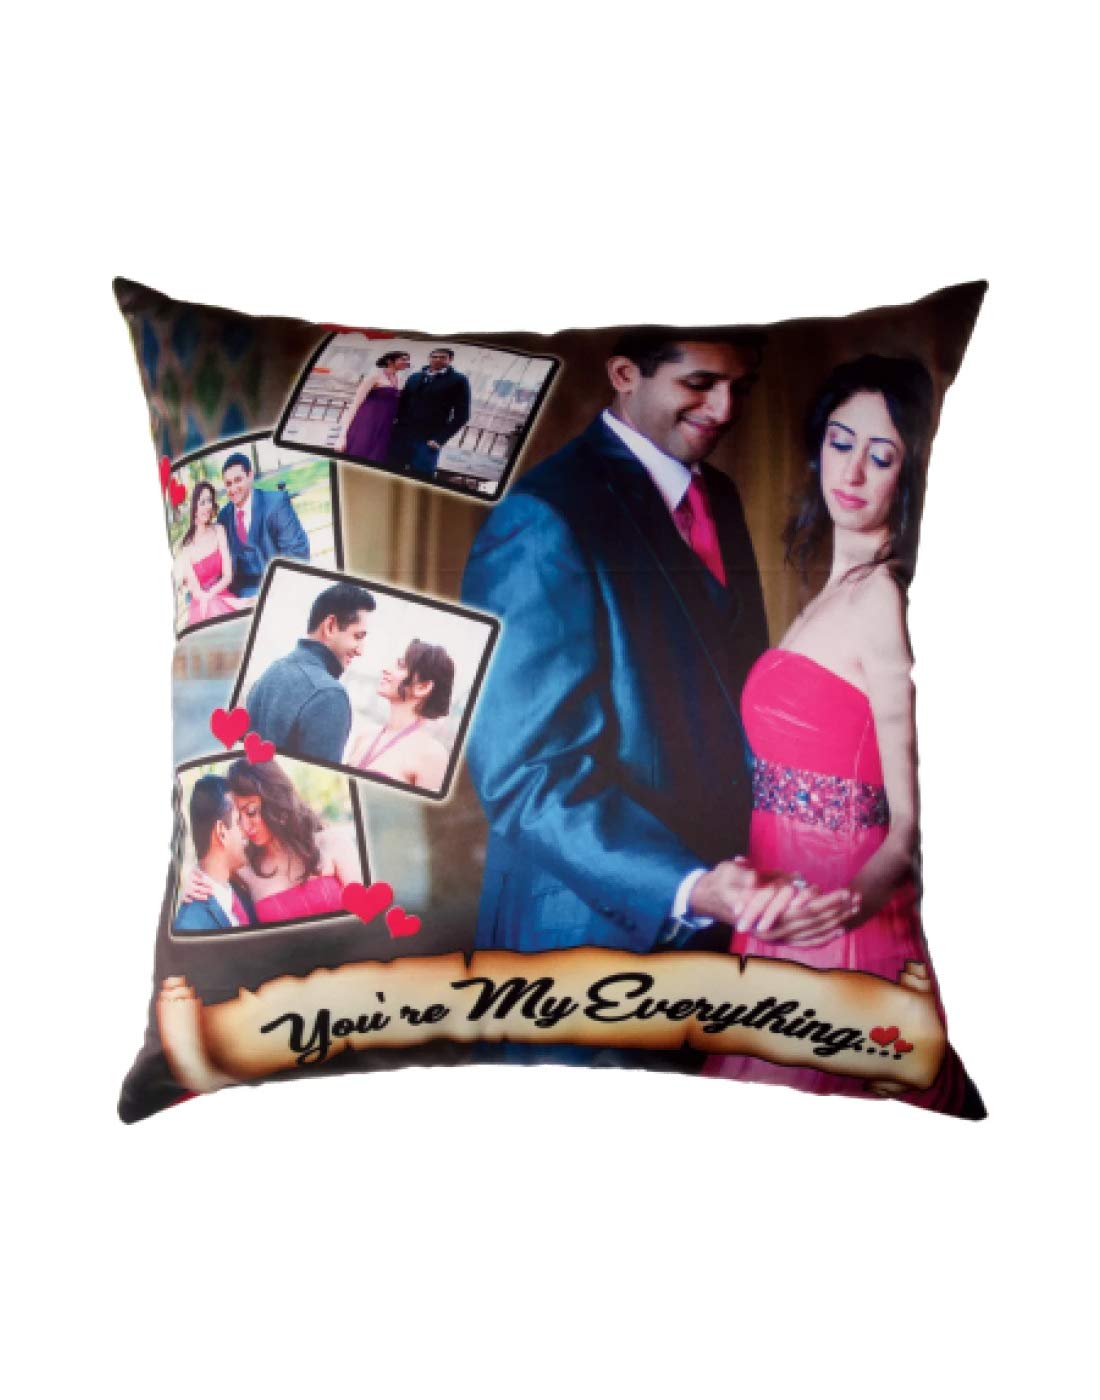 Customised pillow - Red Moments